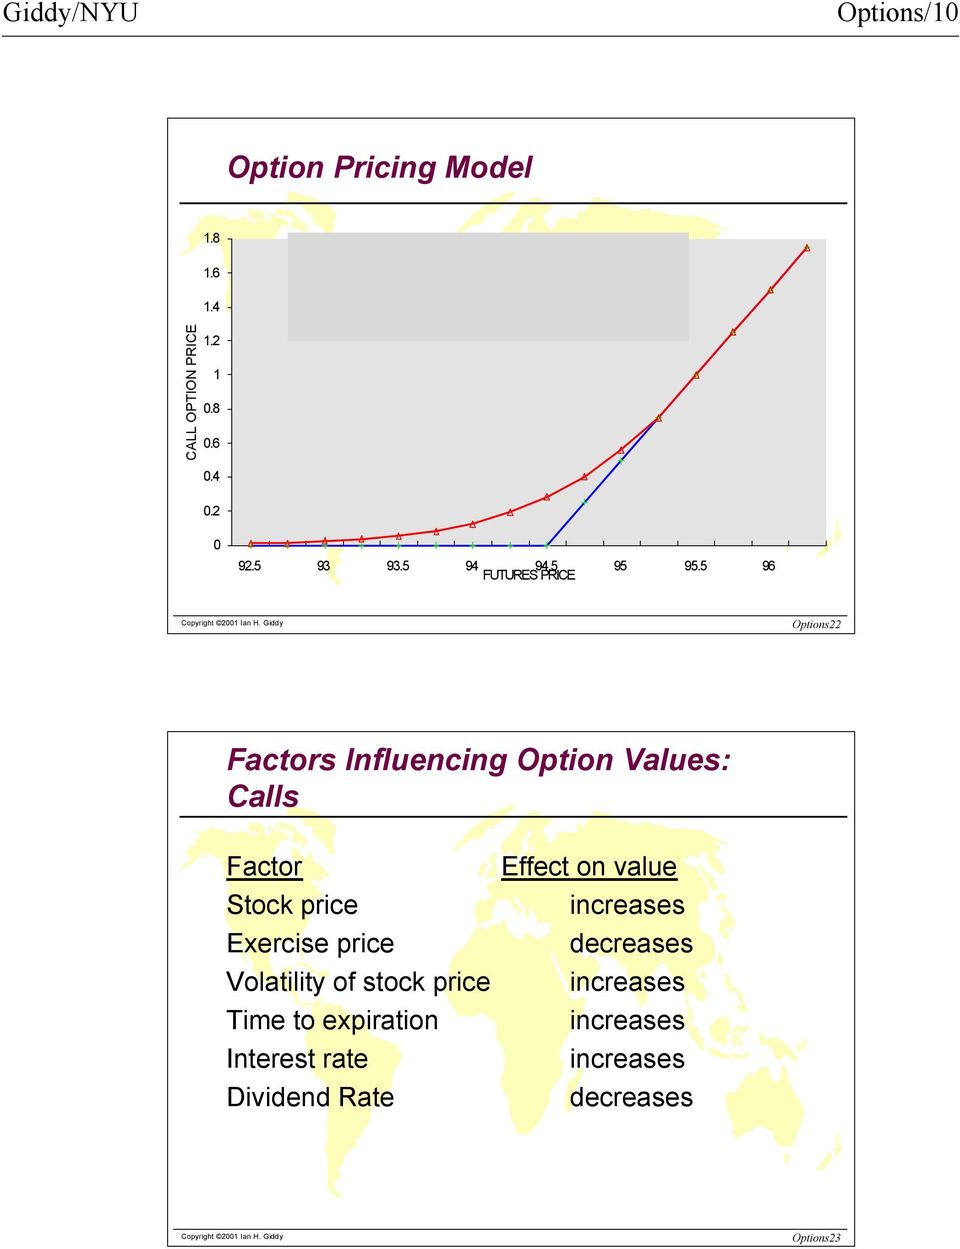 5 96 FUTURES PRICE Options22 Factors Influencing Option Values: Calls Factor Stock price Exercise price